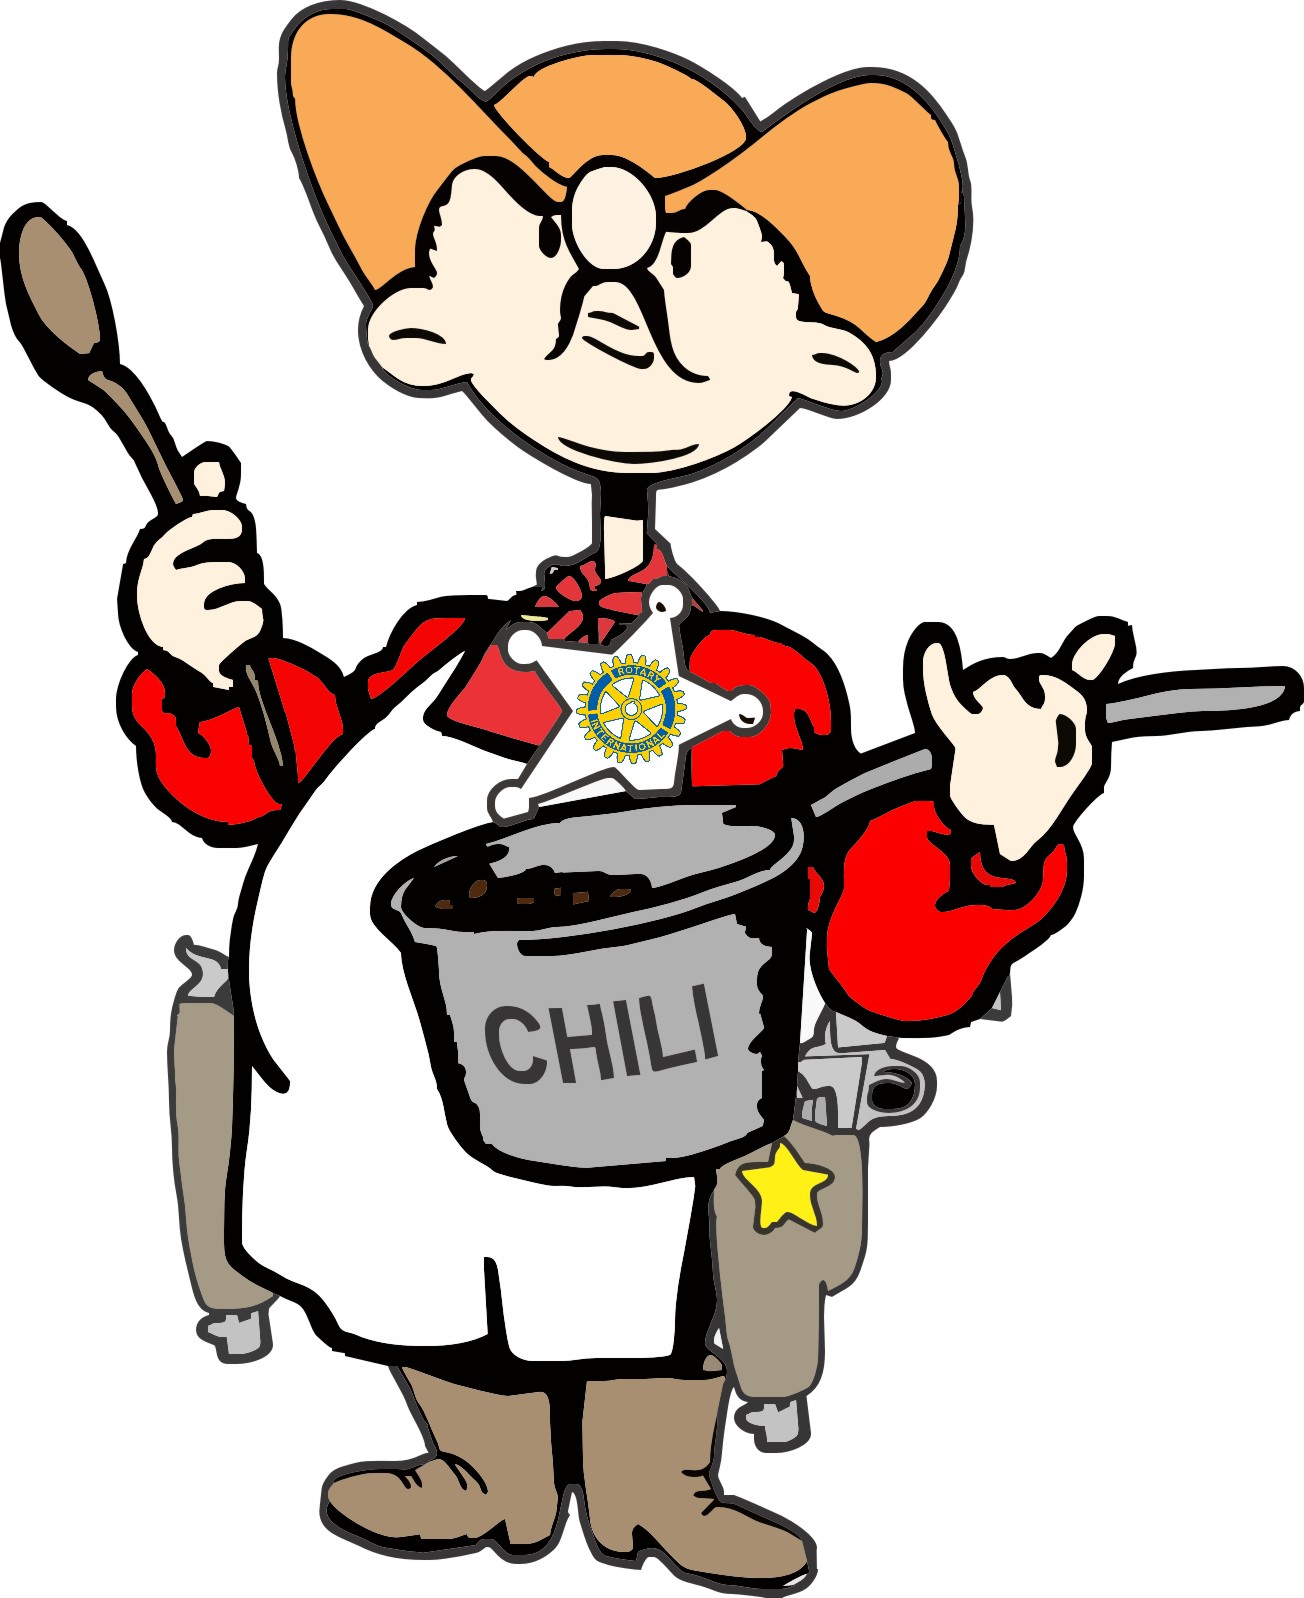 chili-cook-off-winner-certificate-free-download-clip-art-free